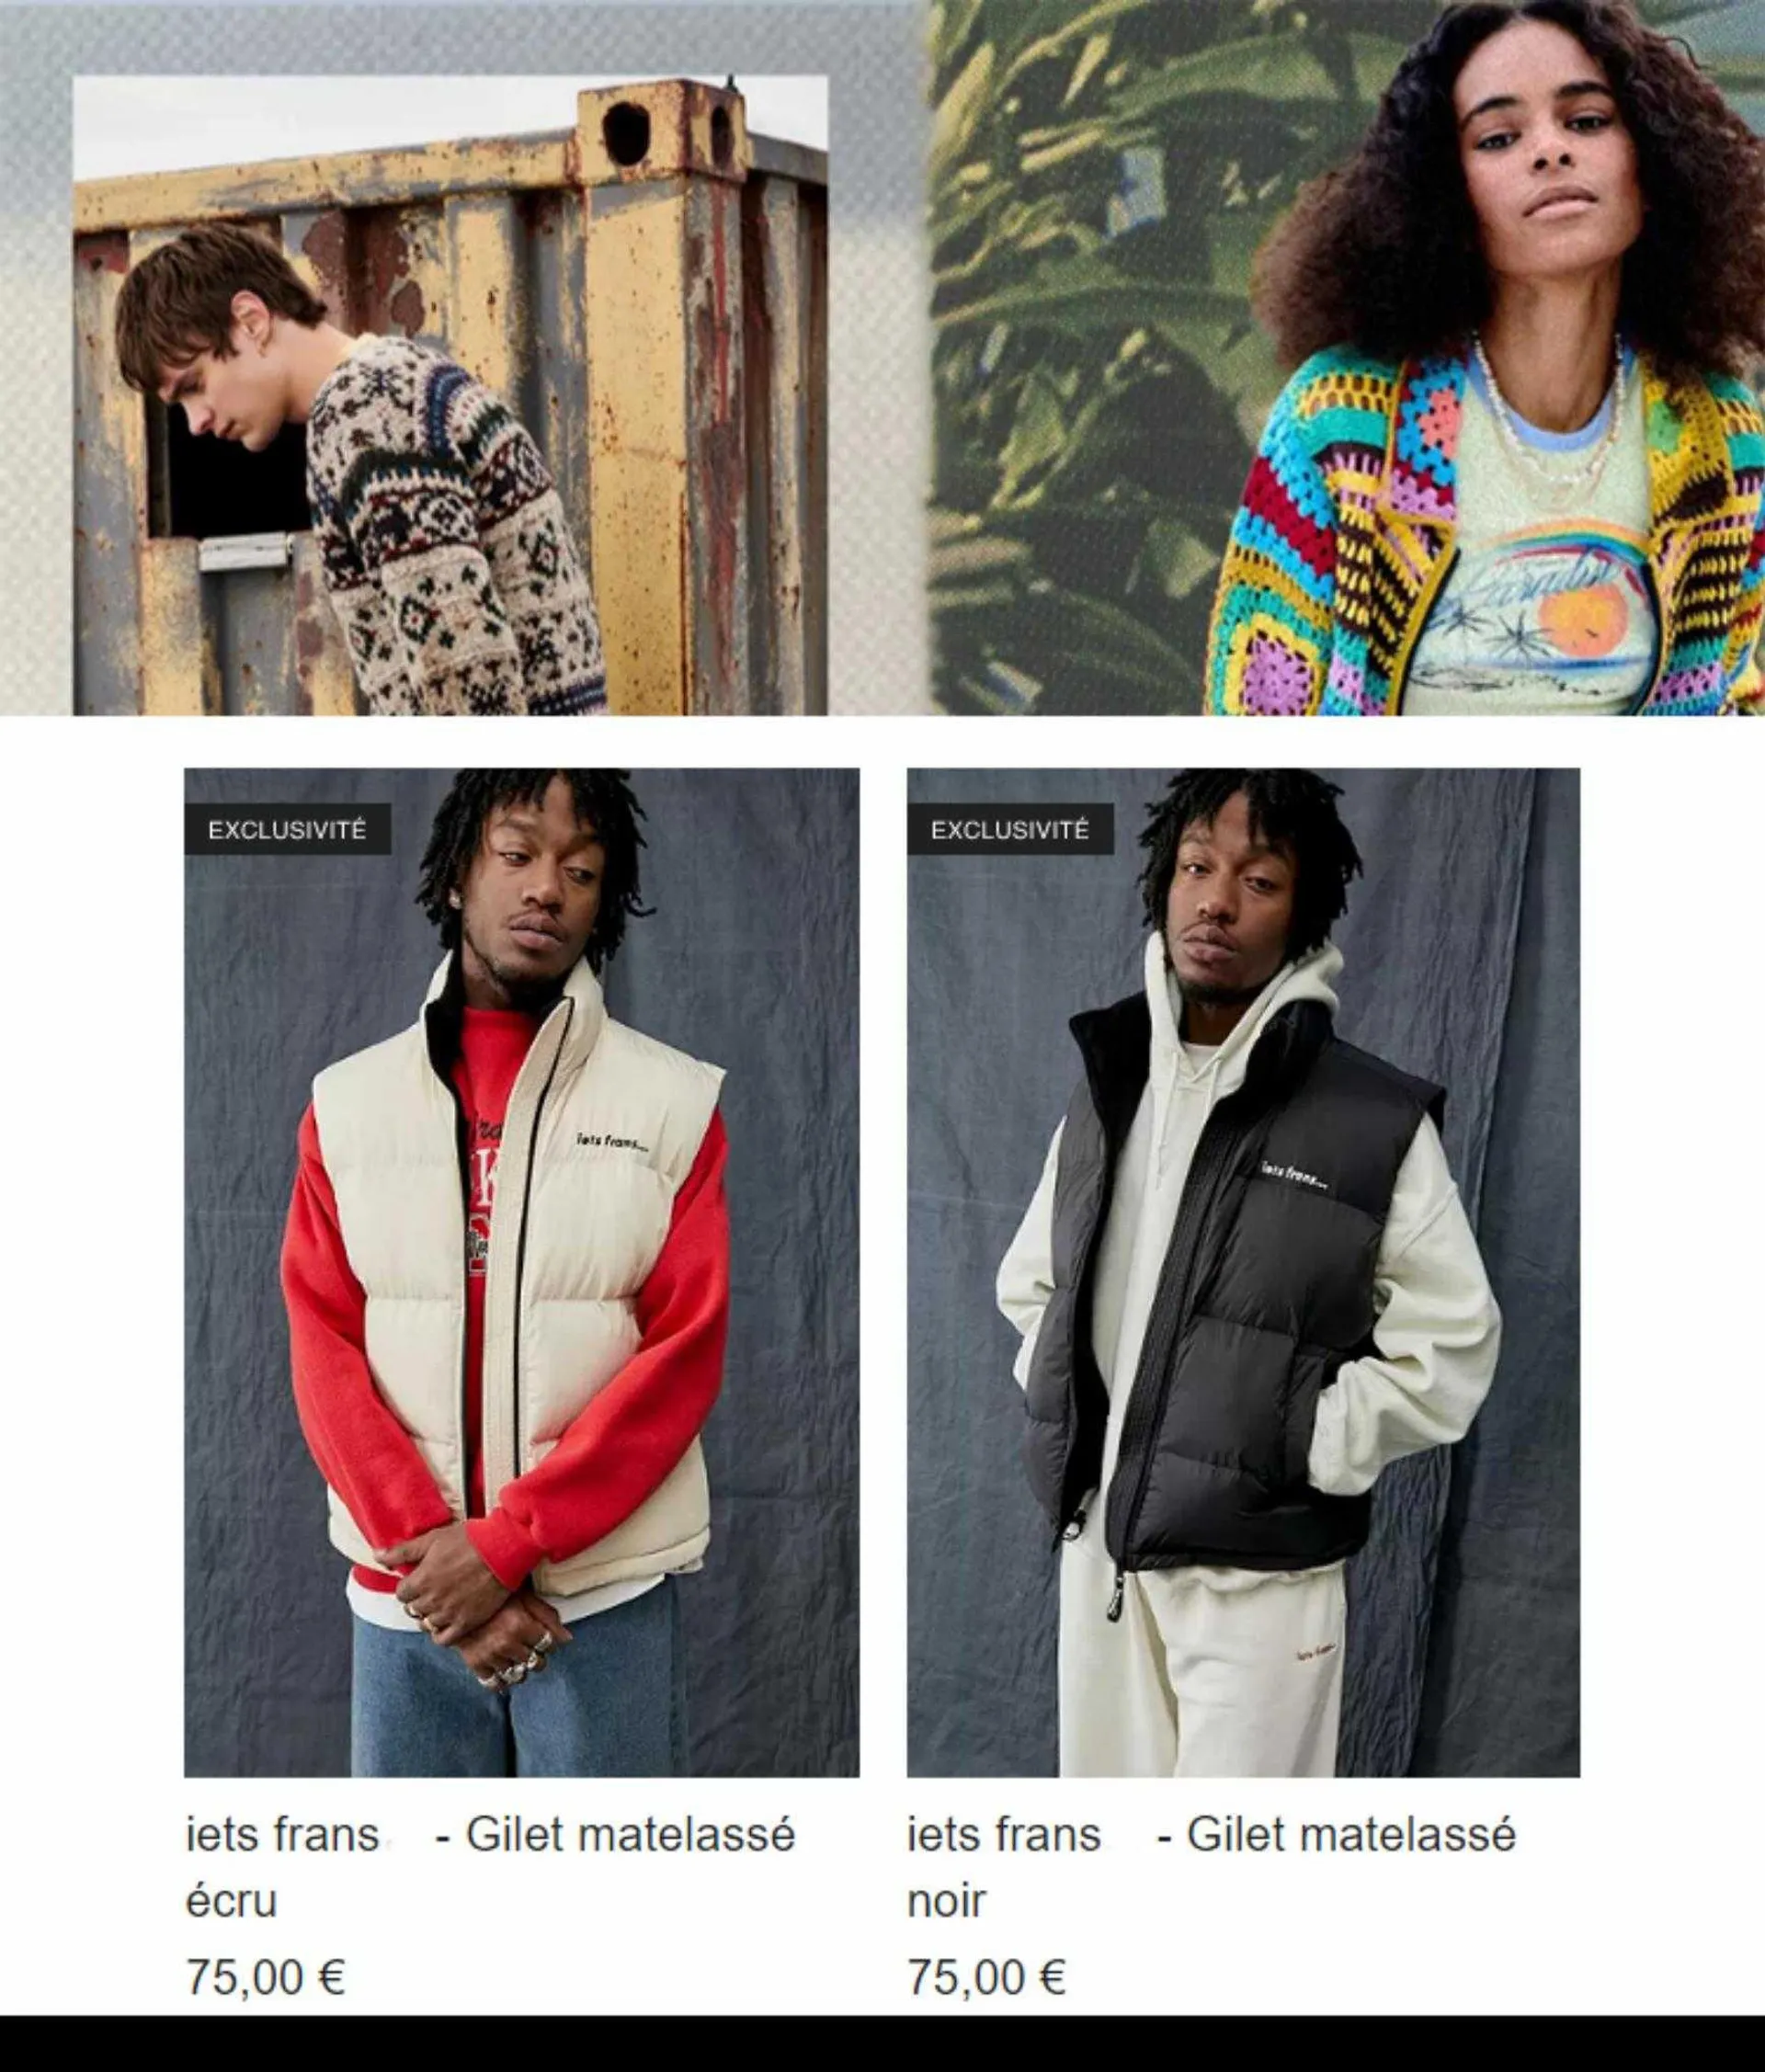 Catalogue Urban Outfitters - 6